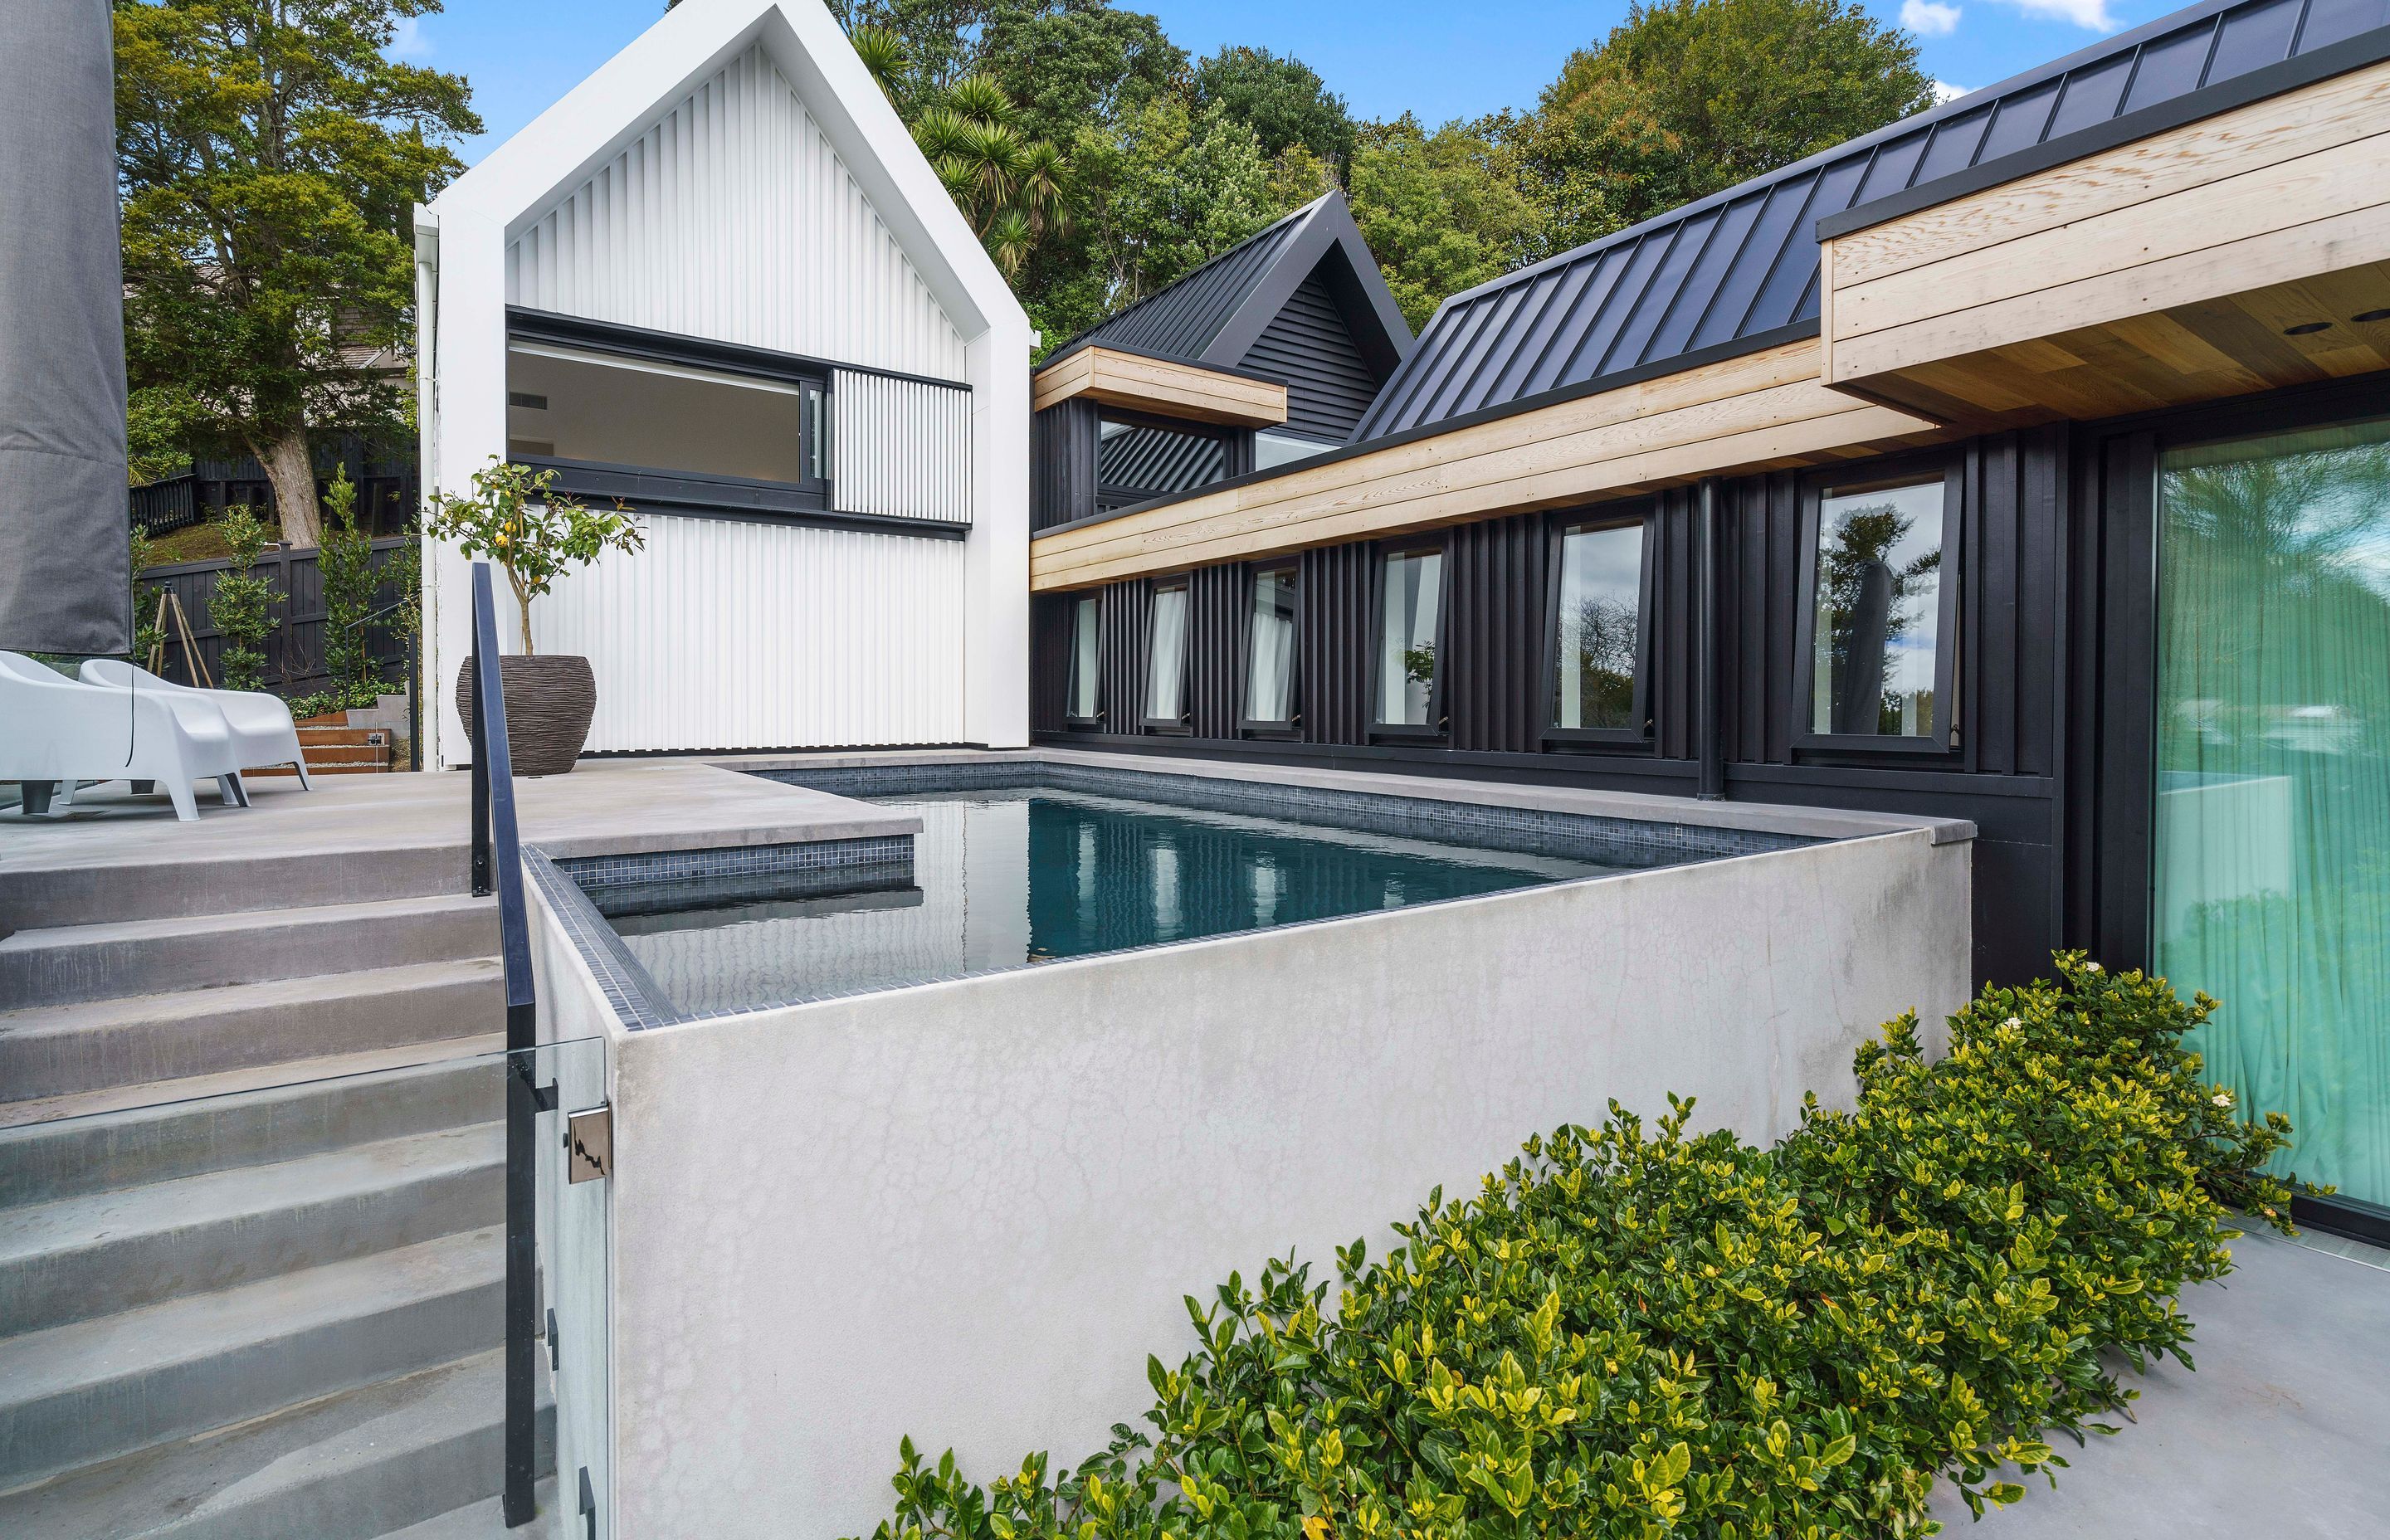 A clever use of space has allowed for the inclusion of a custom concrete swimming pool.